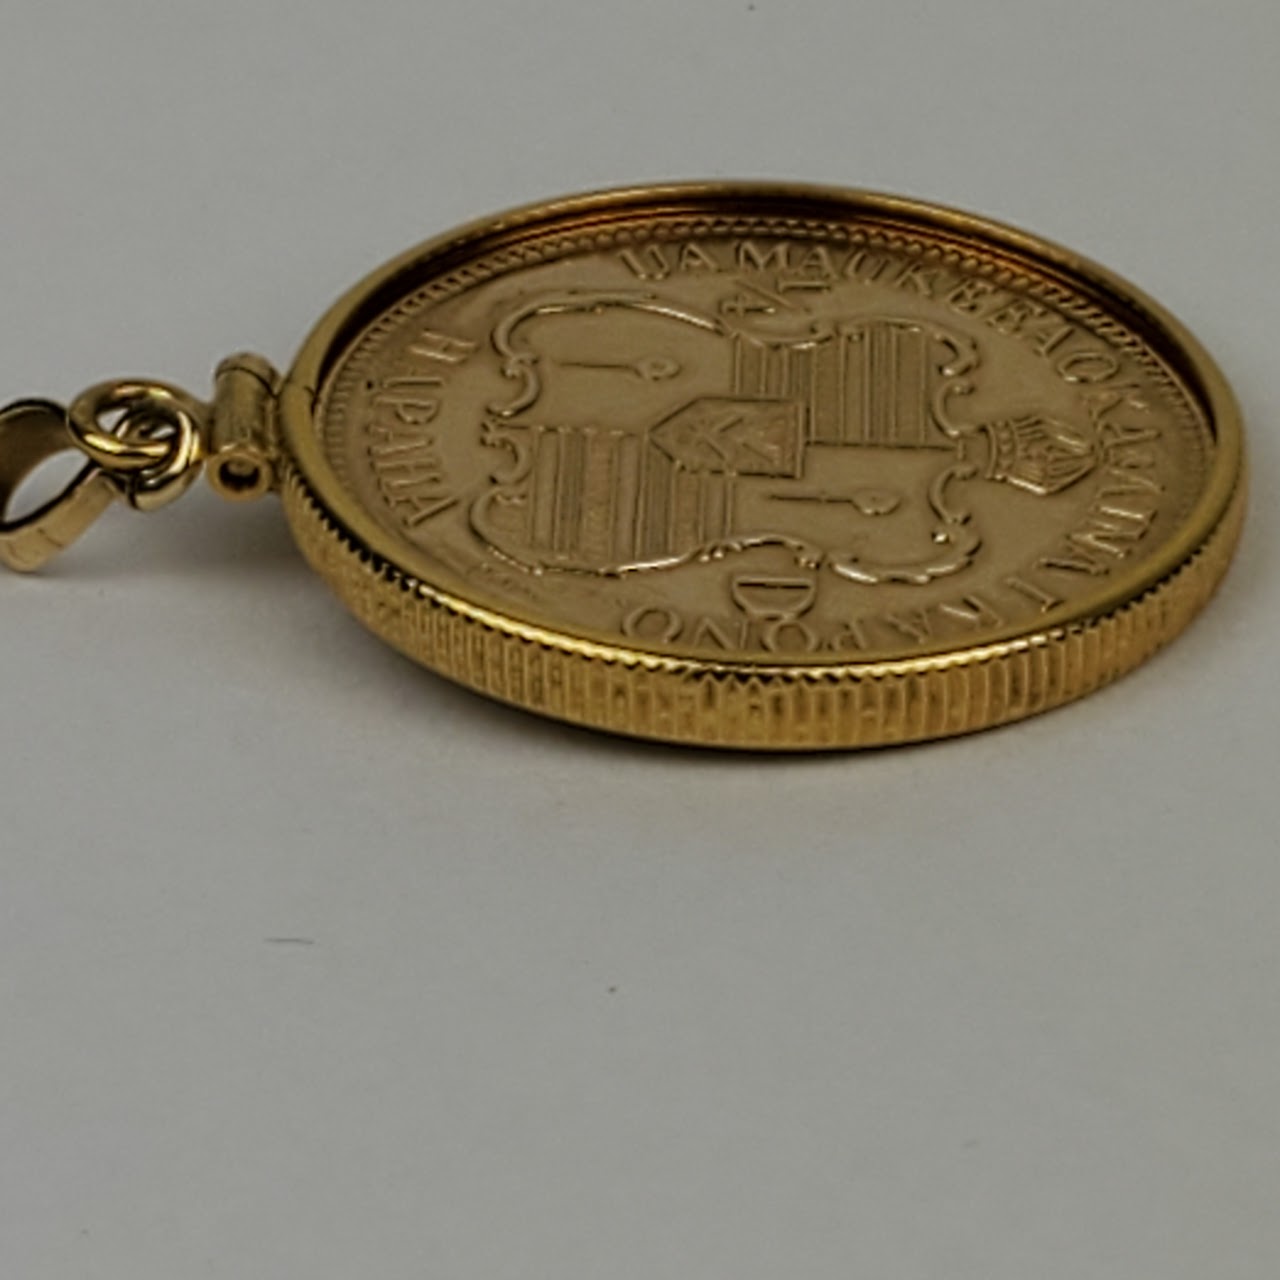 14K Gold King of Hawaii Coin Pendant